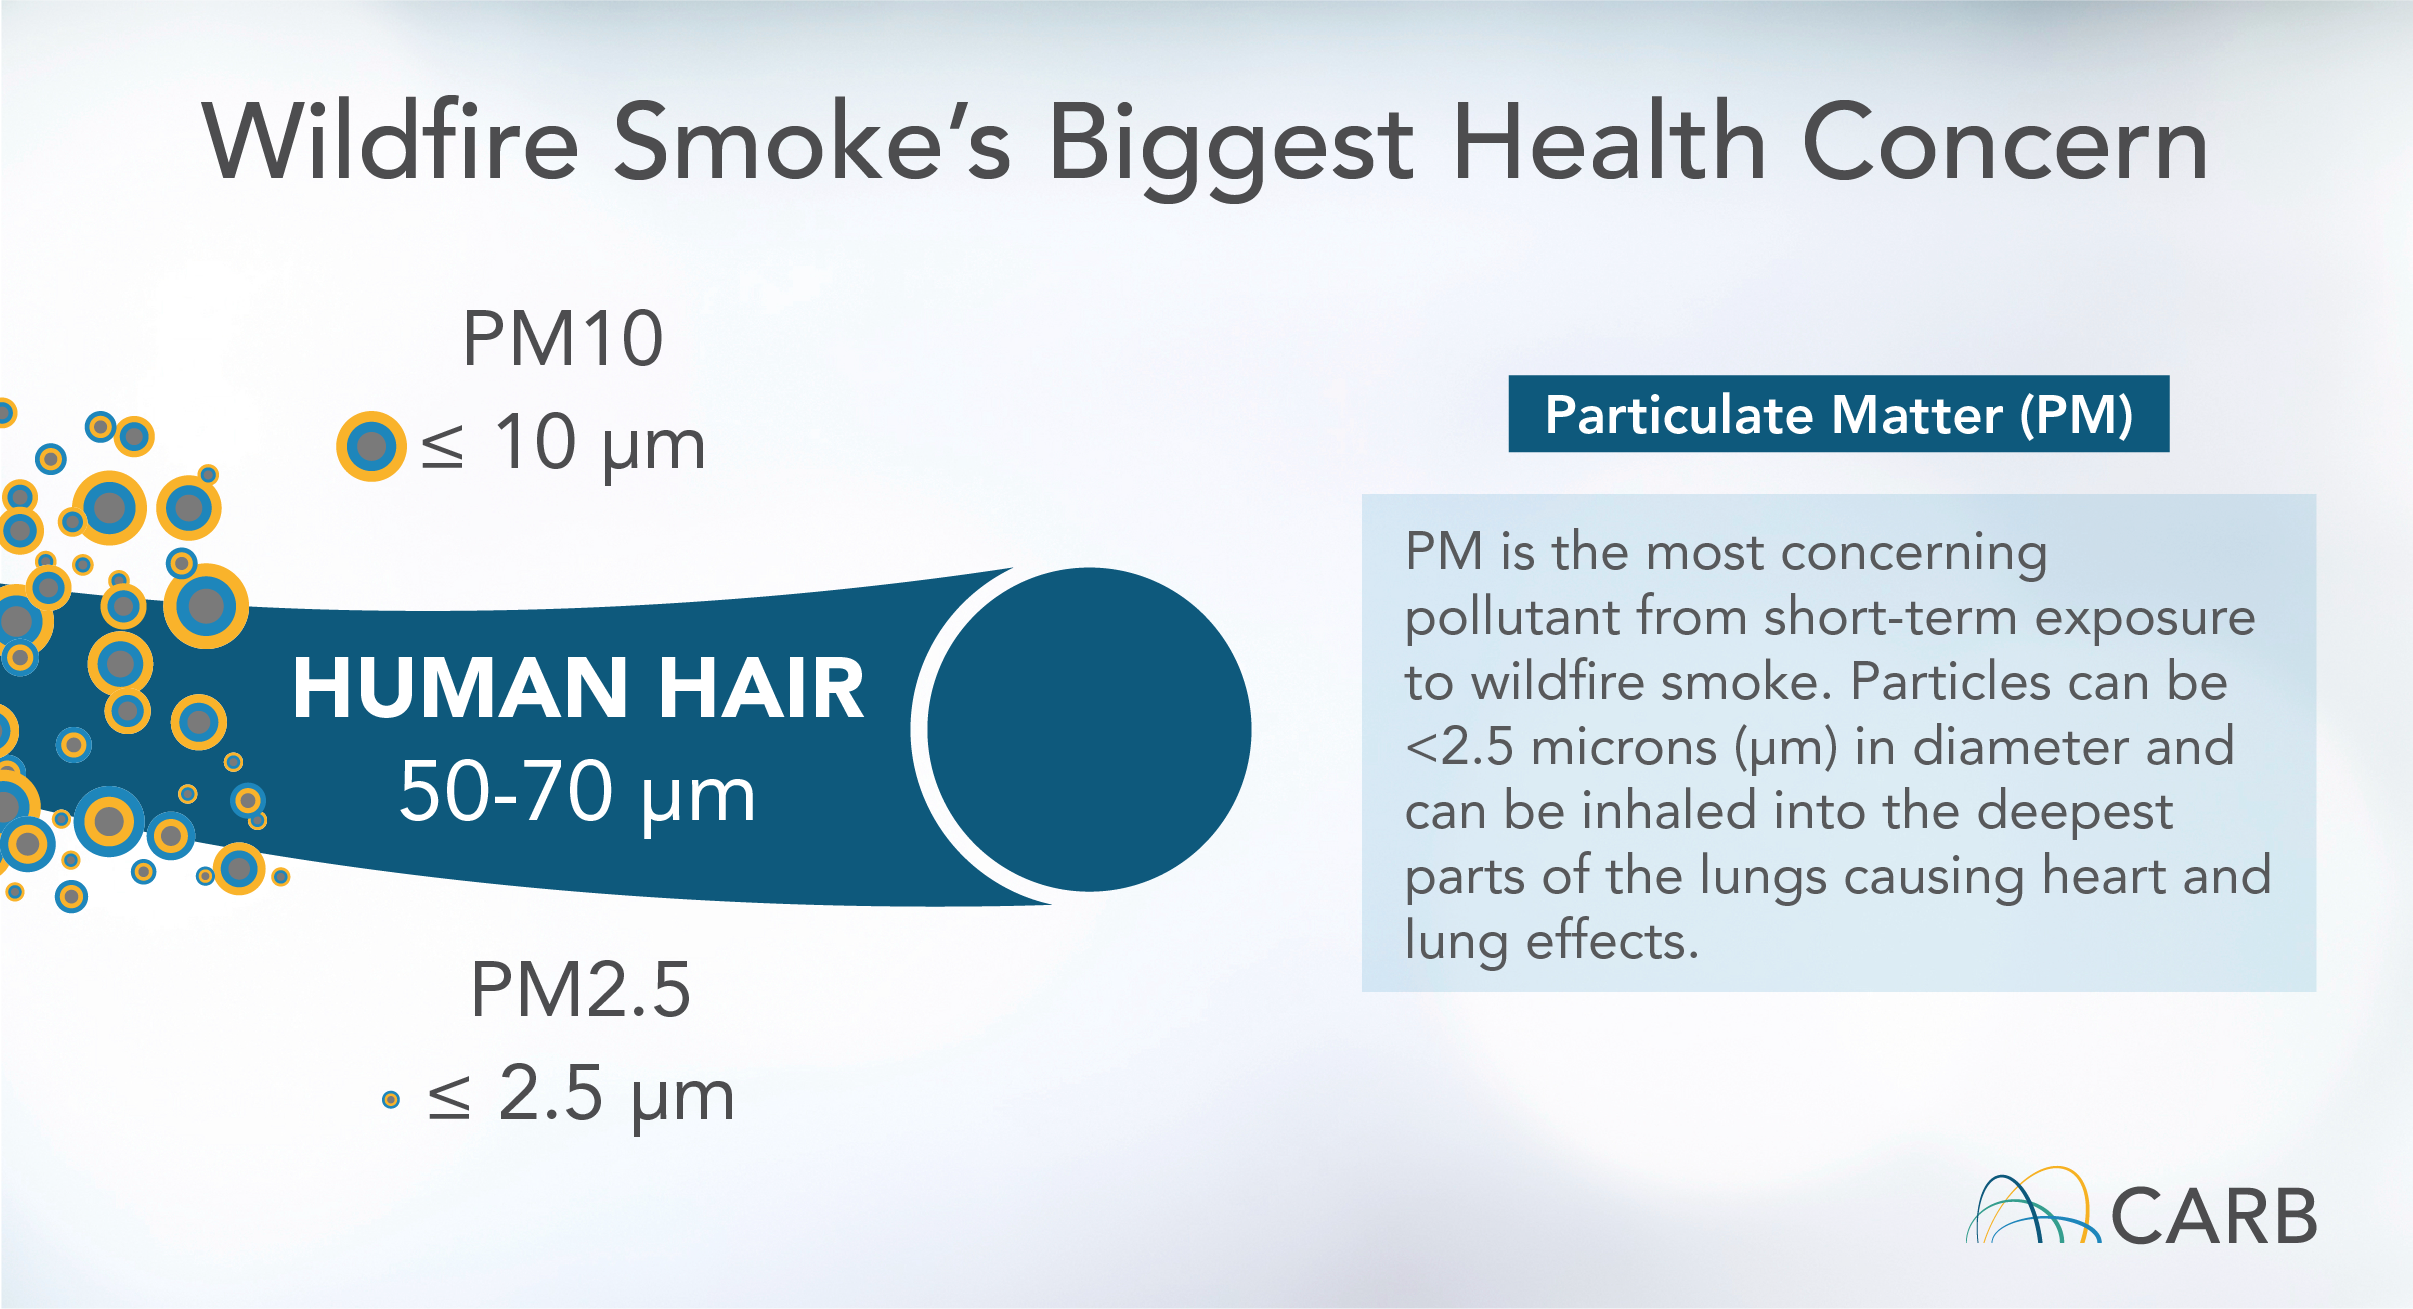 Wildfire Smoke’s Biggest Health Concern - PM is the most concerning pollutant from short-term exposure to wildfire smoke. Particles can be <2.5 microns (μm) in diameter and can be inhaled into the deepest parts of the lungs causing heart and lung effects. PM2.5: ≤ 2.5 μm, PM10: ≤ 10 μm, Human Hair: 50-70 μm. 